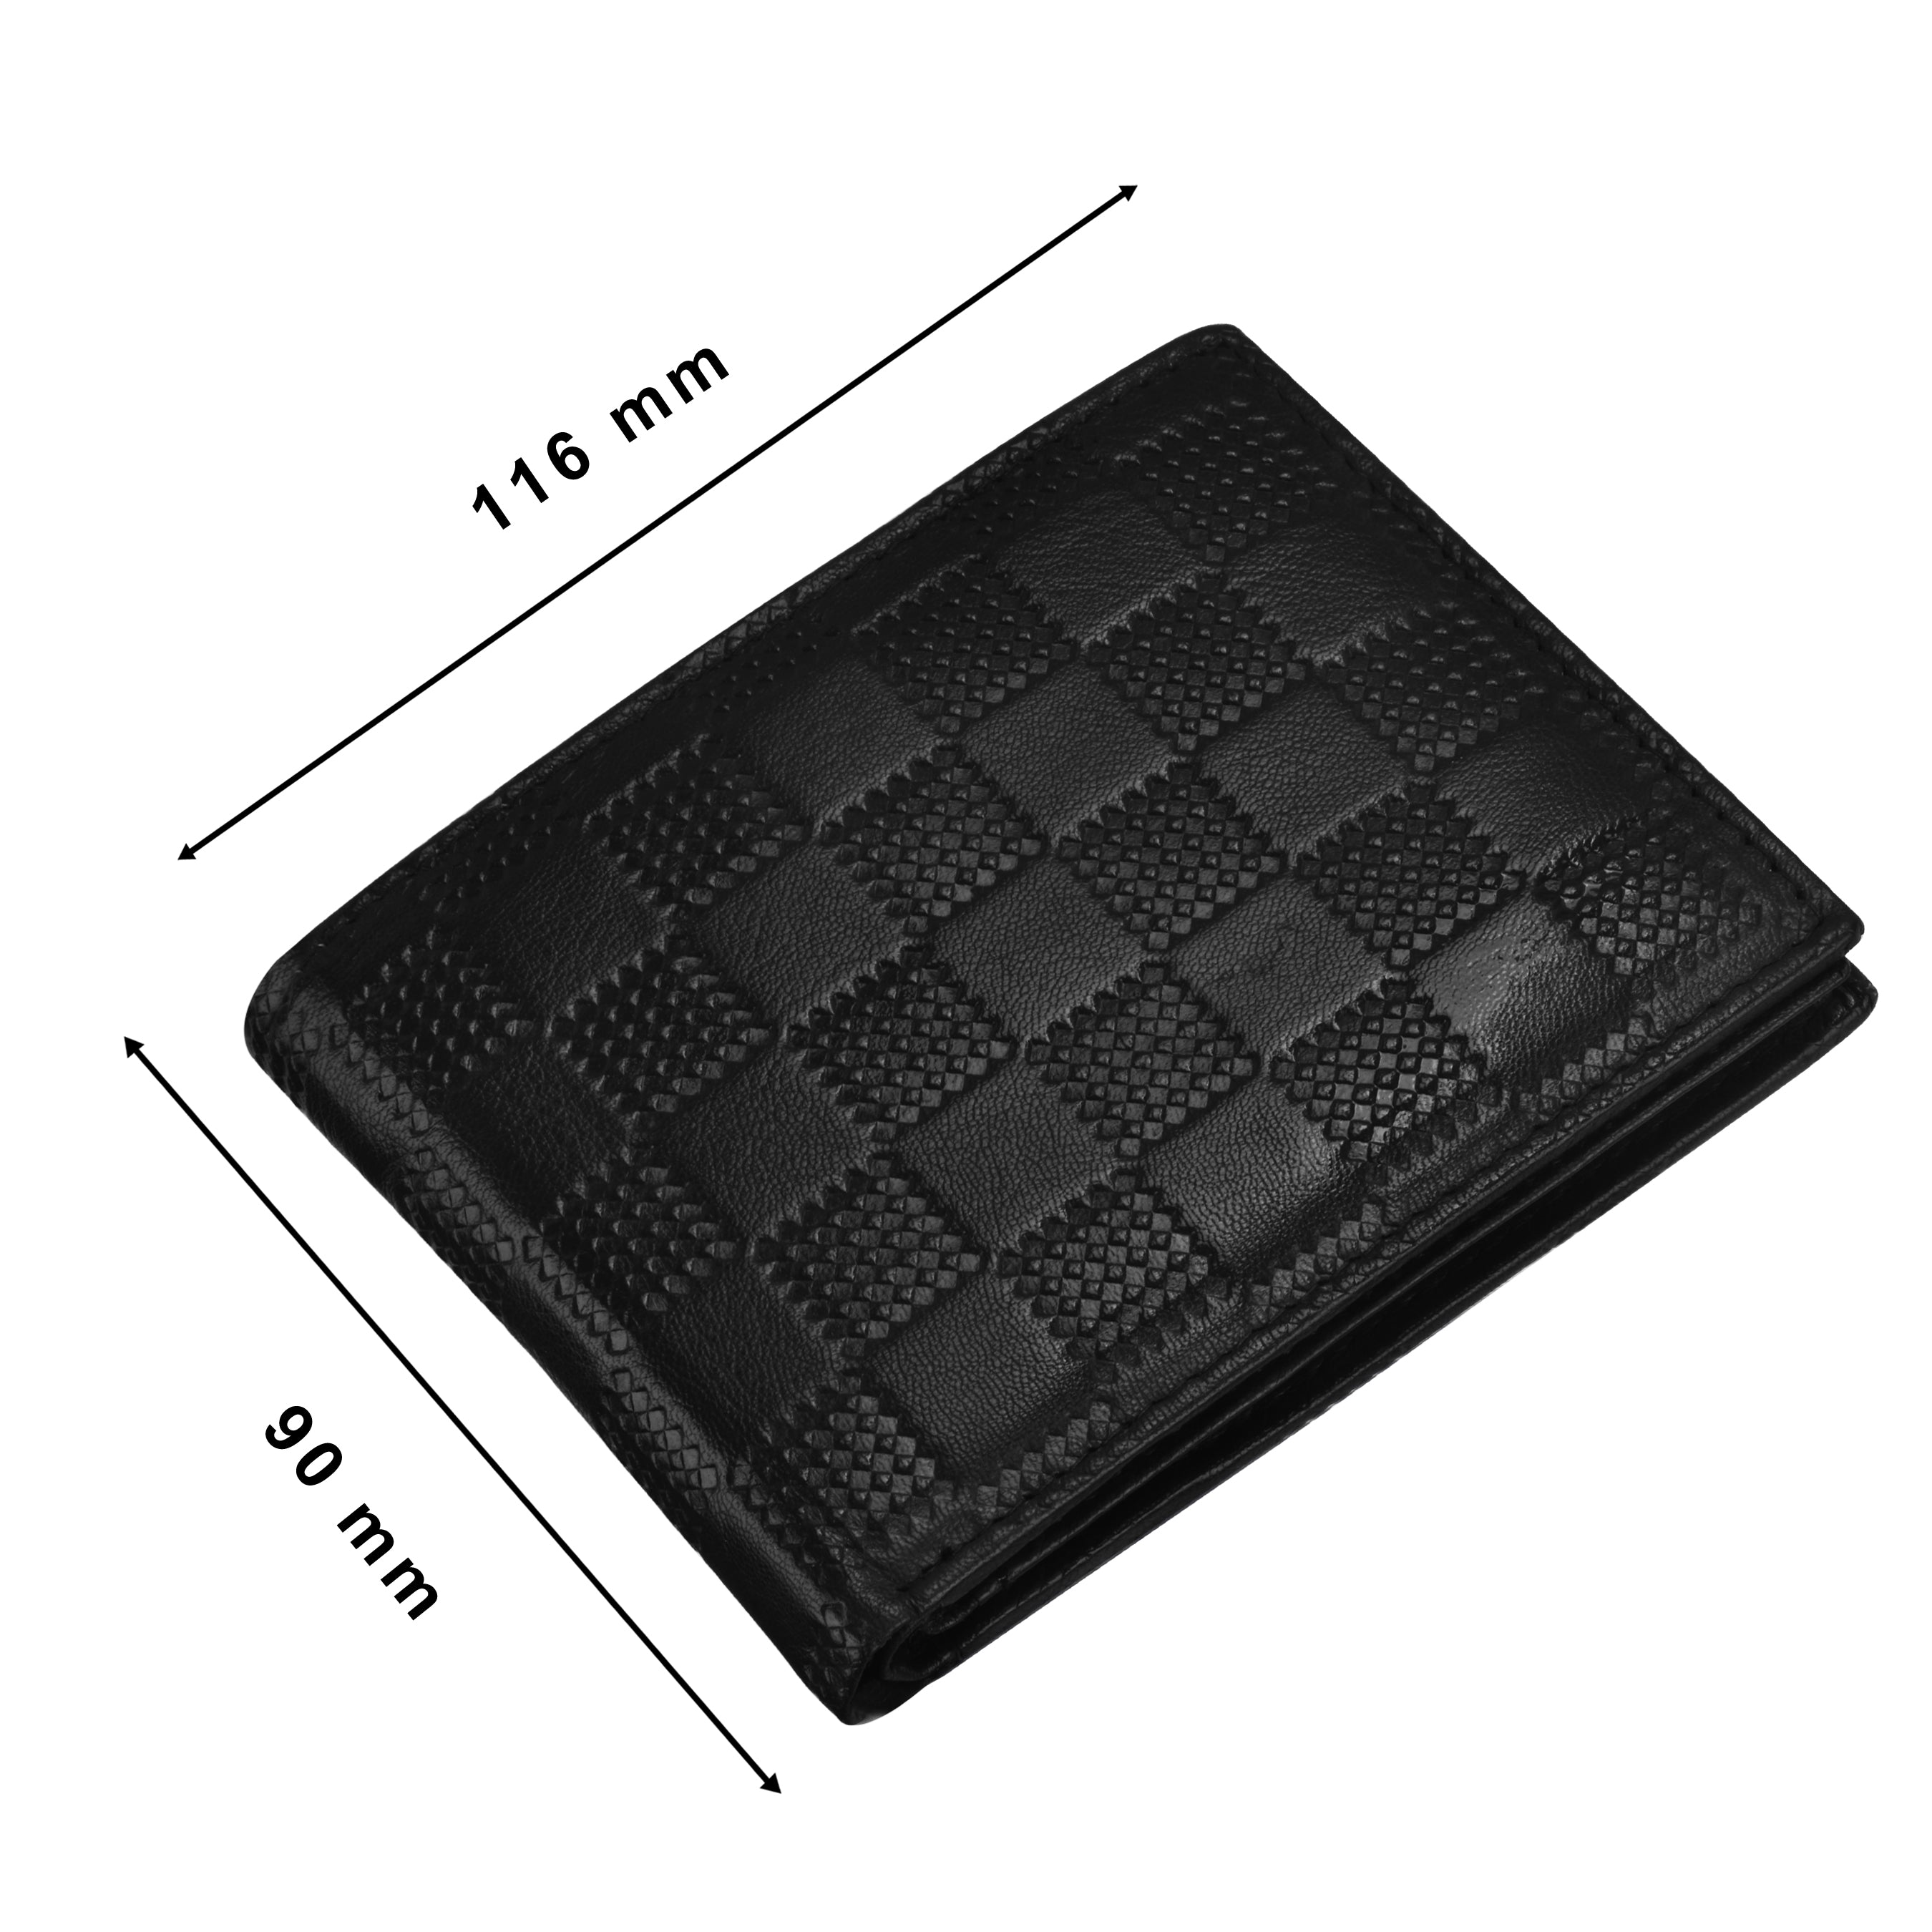 Black Leather Bi-Fold Wallet with RFID Blocking - Embossed Box Pattern, Zippered Coin Pocket, and ID Card Slot